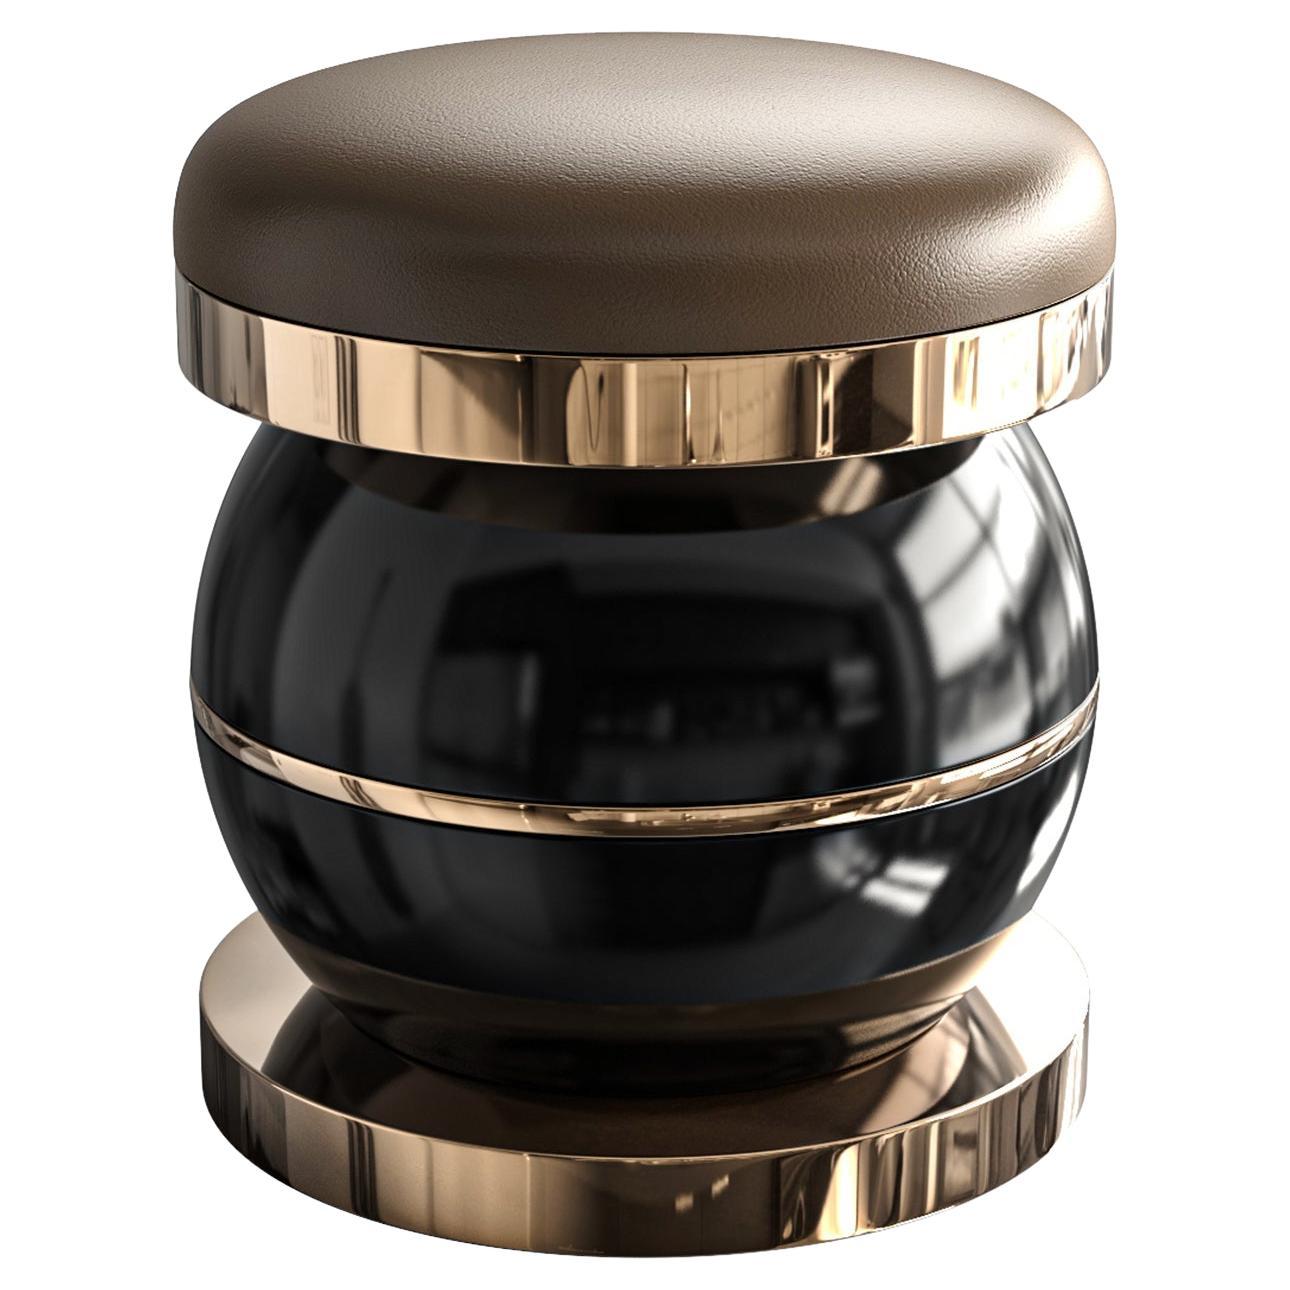 "Passione" Ottoman & Pouf with Bronze and Stainless Steel, Istanbul